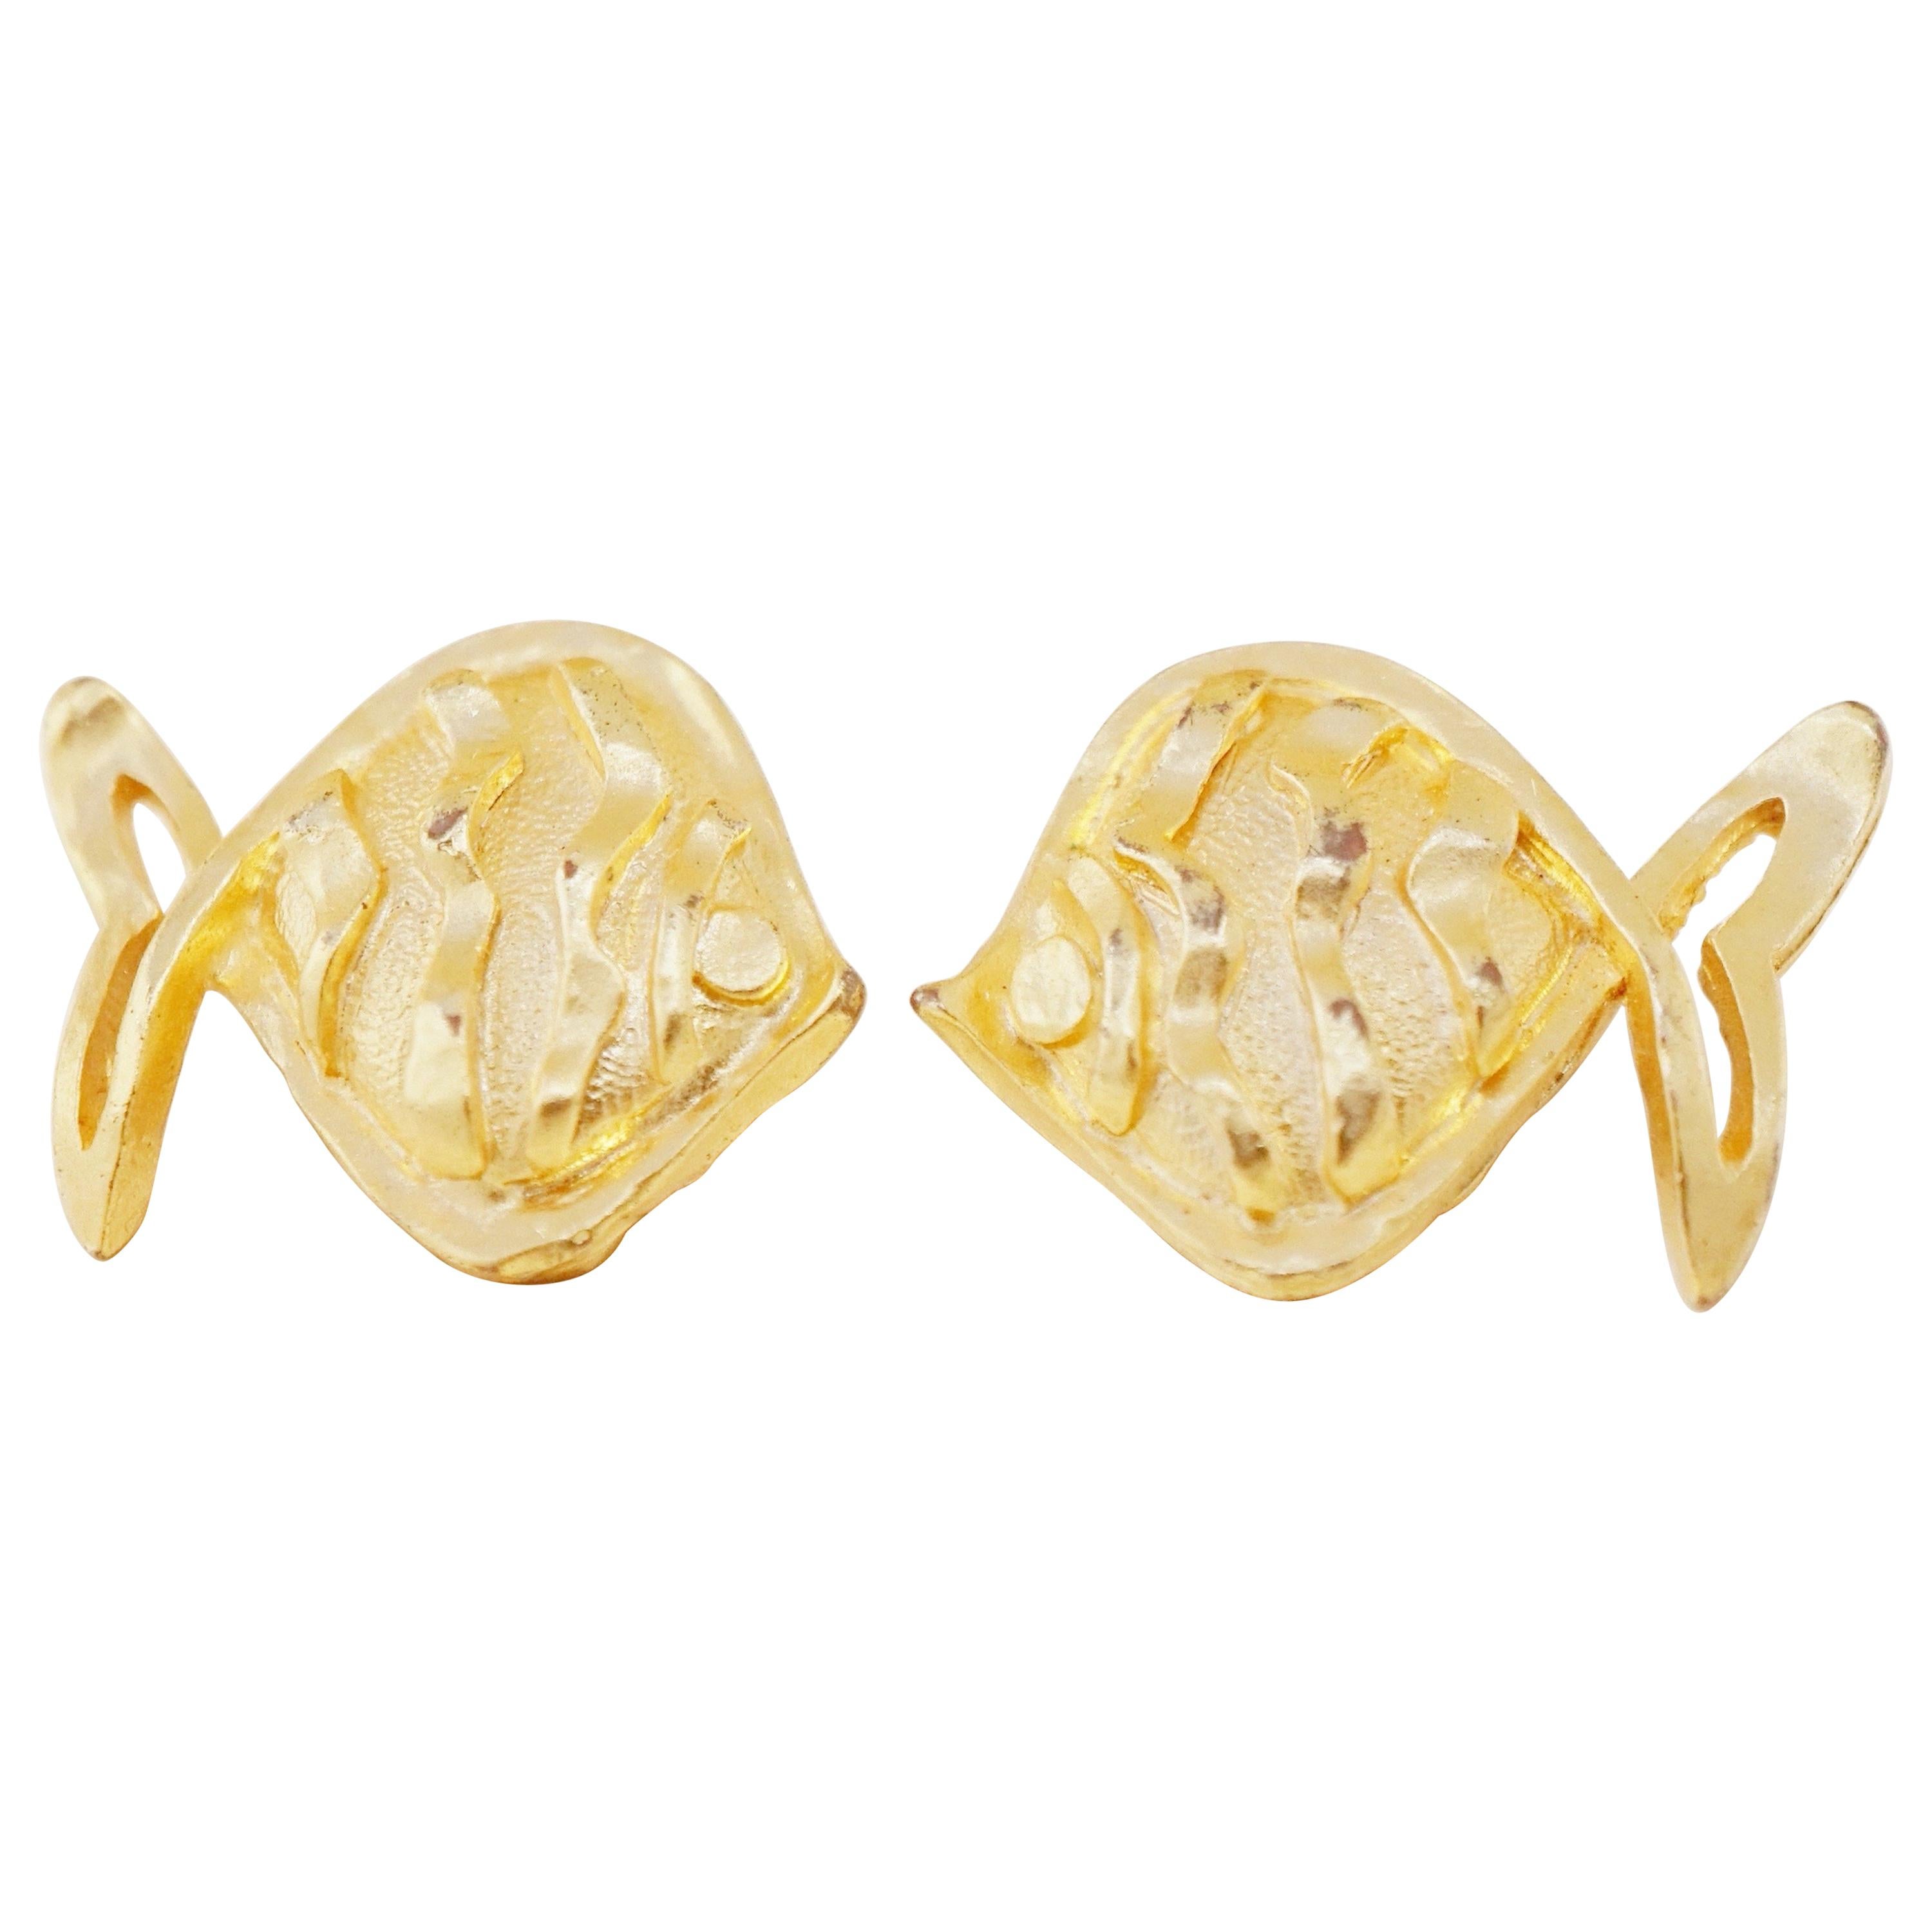 Vintage Gilded Fish Figural Earrings by Hanae Mori, 1970s For Sale